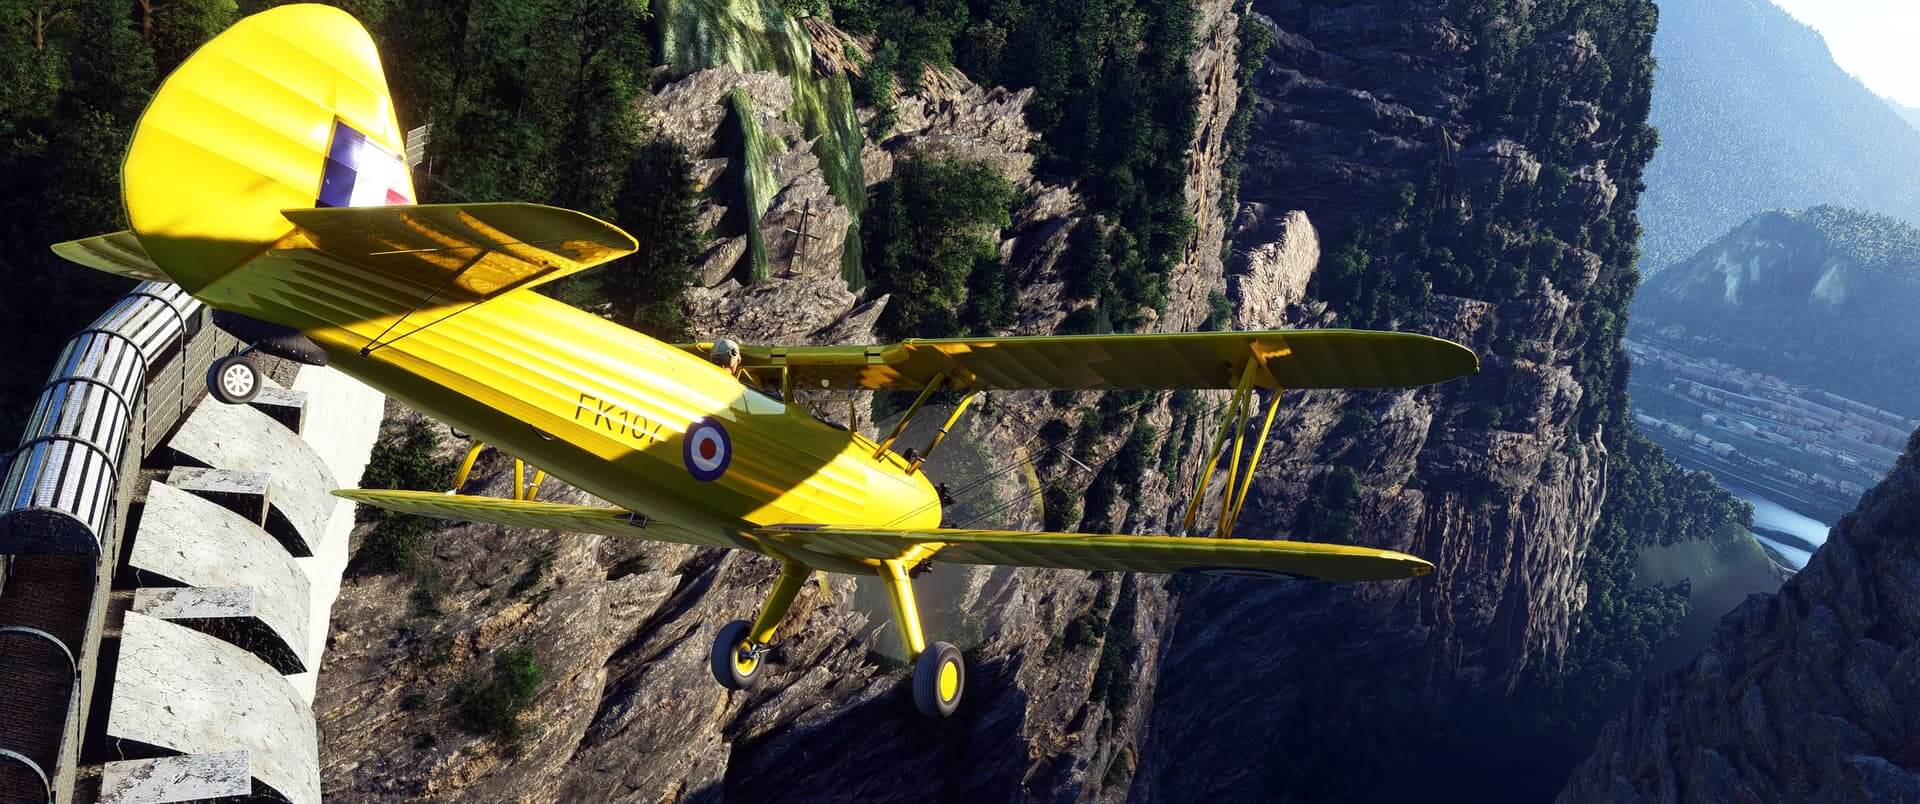 A yellow bi-plane dives into a valley with high terrain rising on either side.